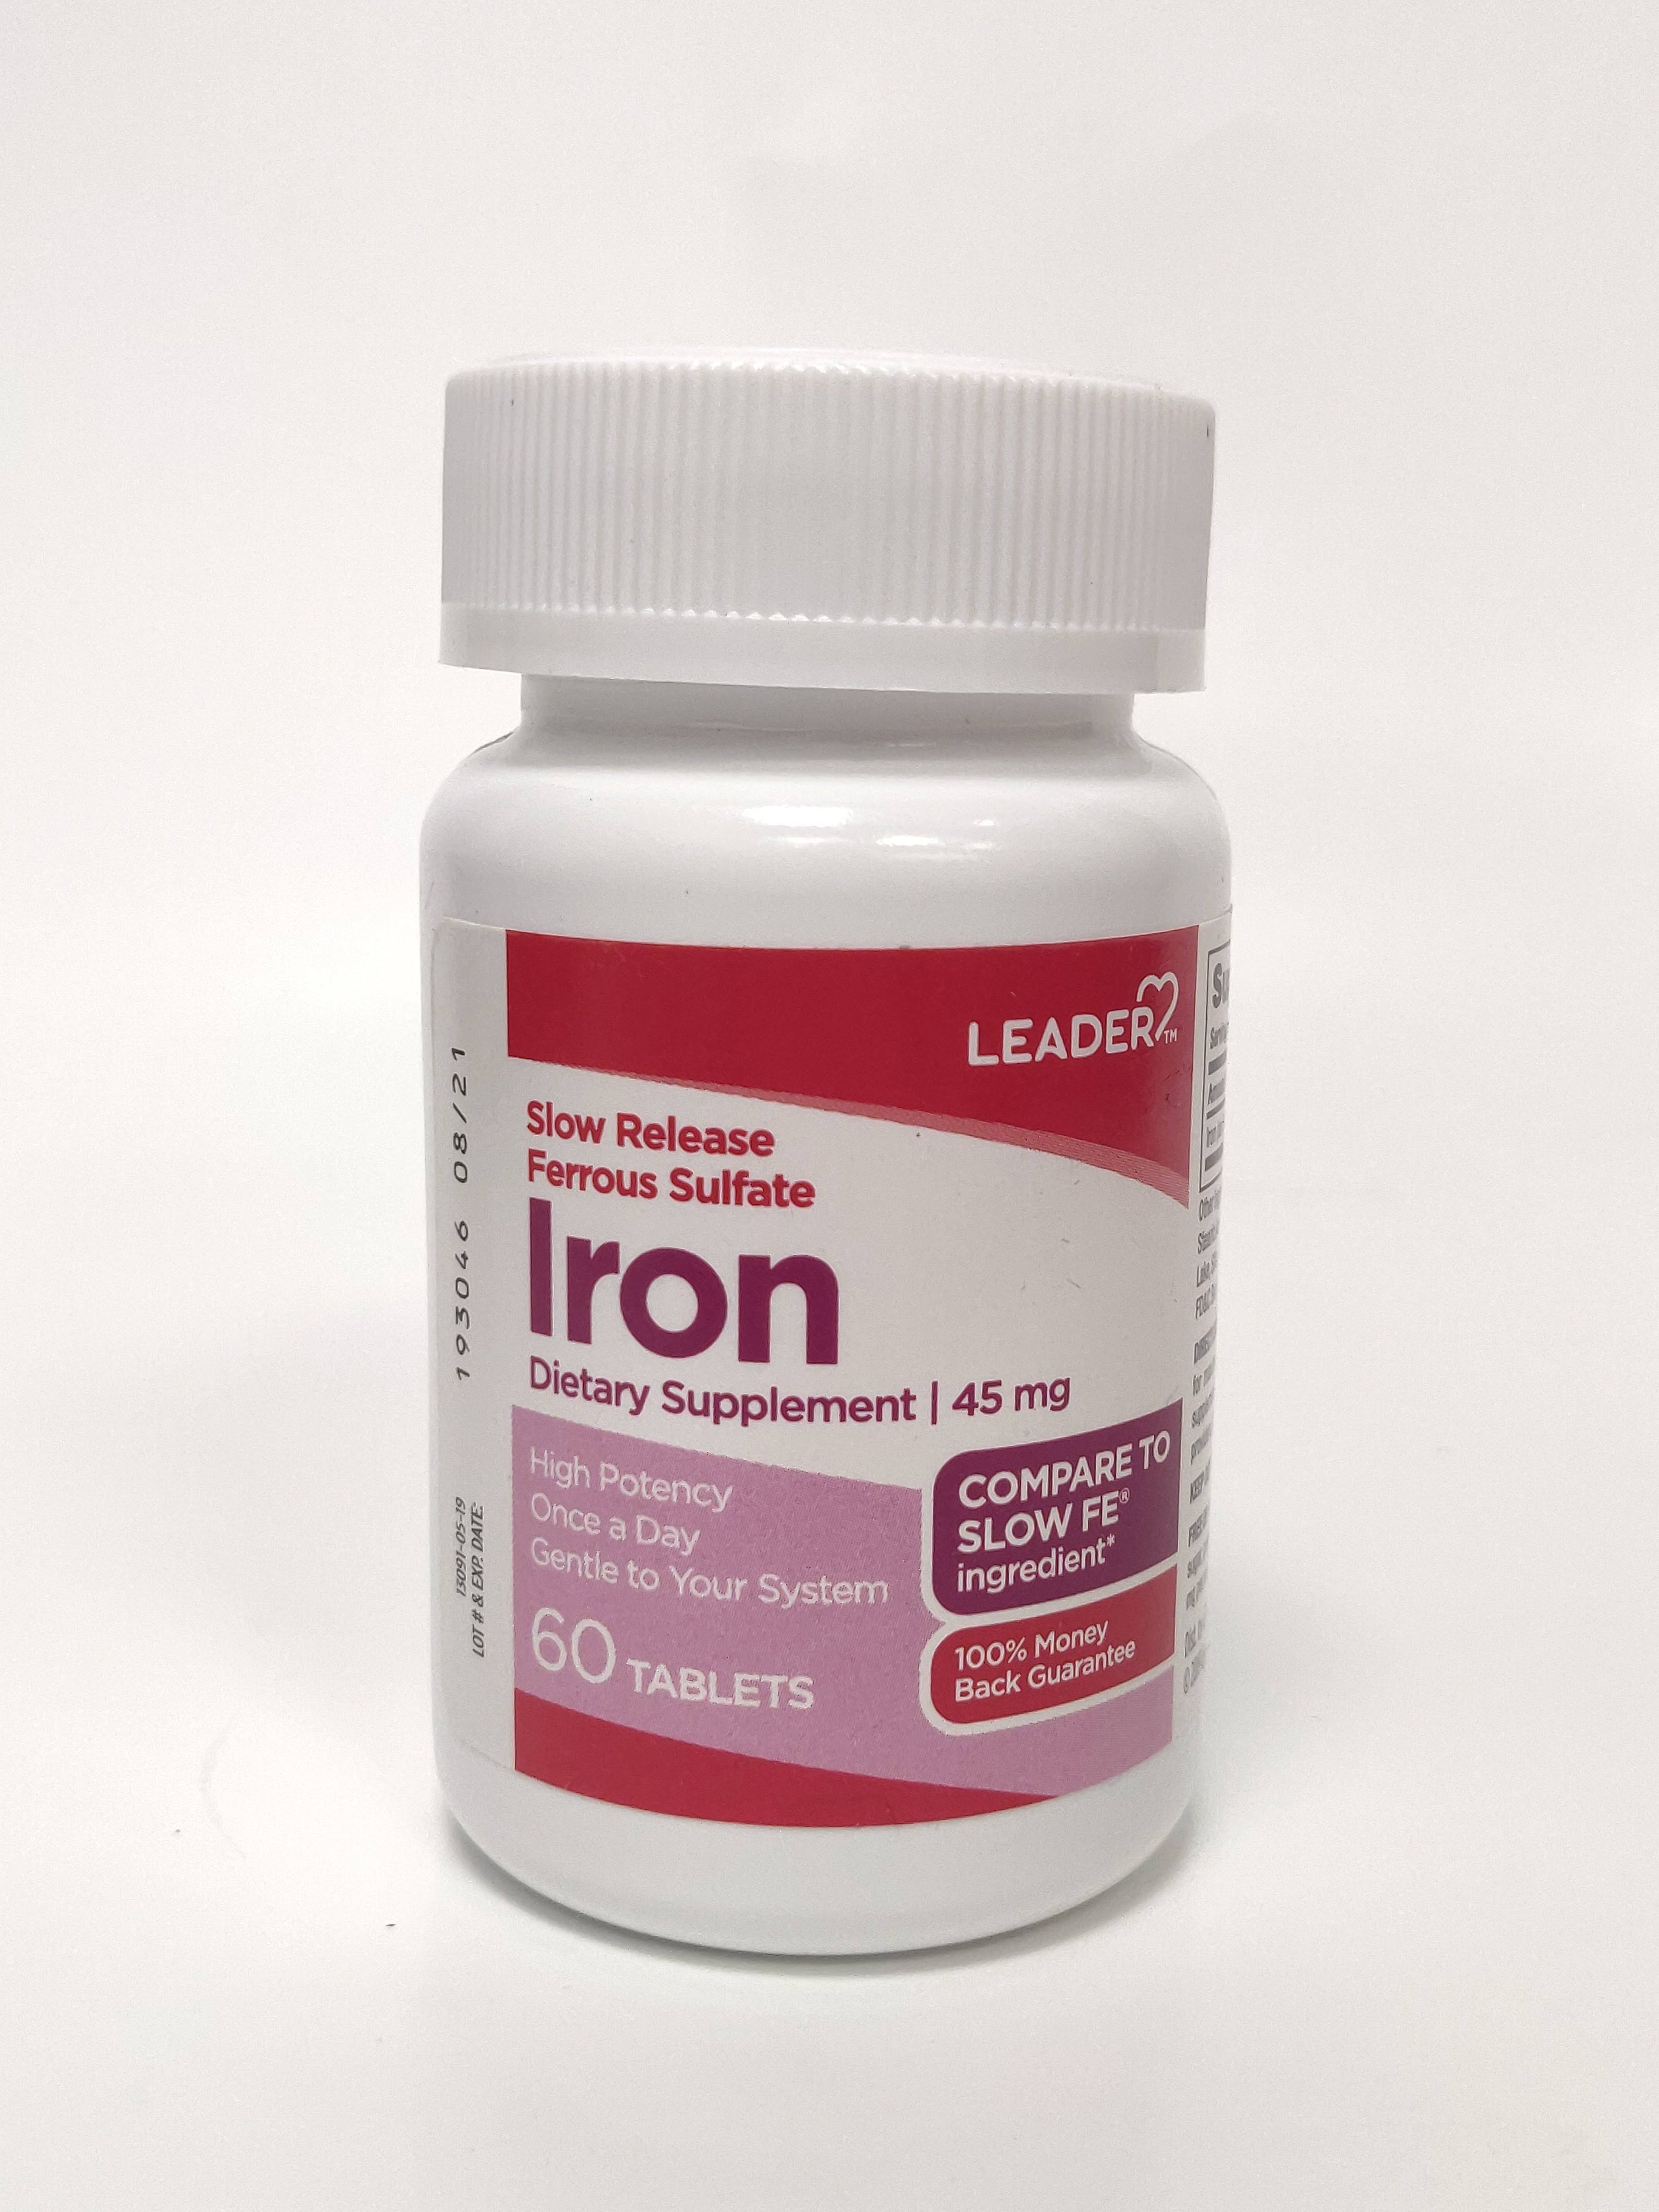 Leader Slow Release Ferrous Sulfate Iron Supplement - 45 mg, 60 Tablets